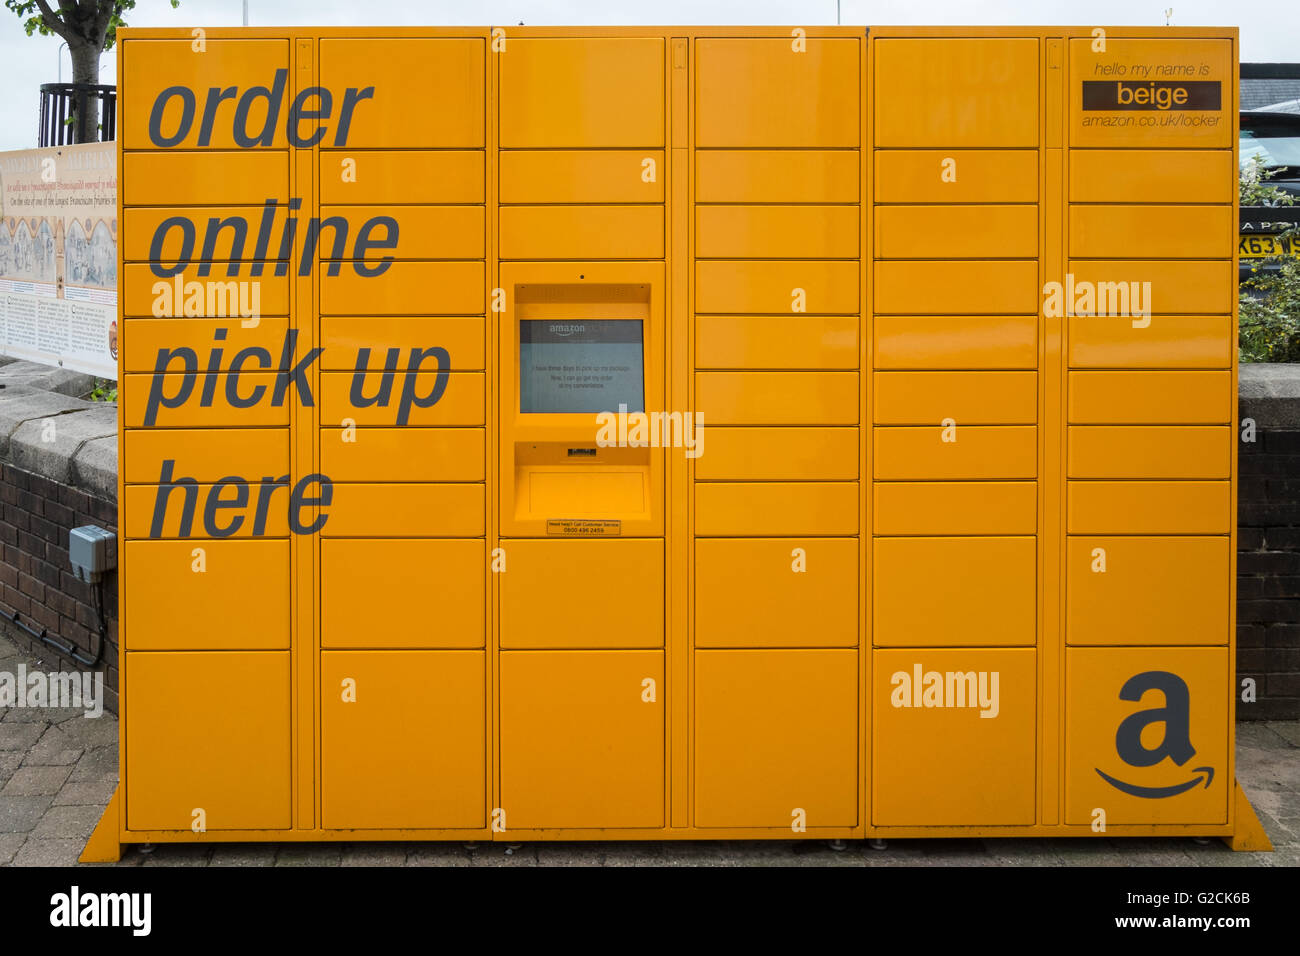 Amazon locker pick up boxes for ordering online in Carmarthen Town centre,Carmarthenshire,Wales,U.K. Stock Photo